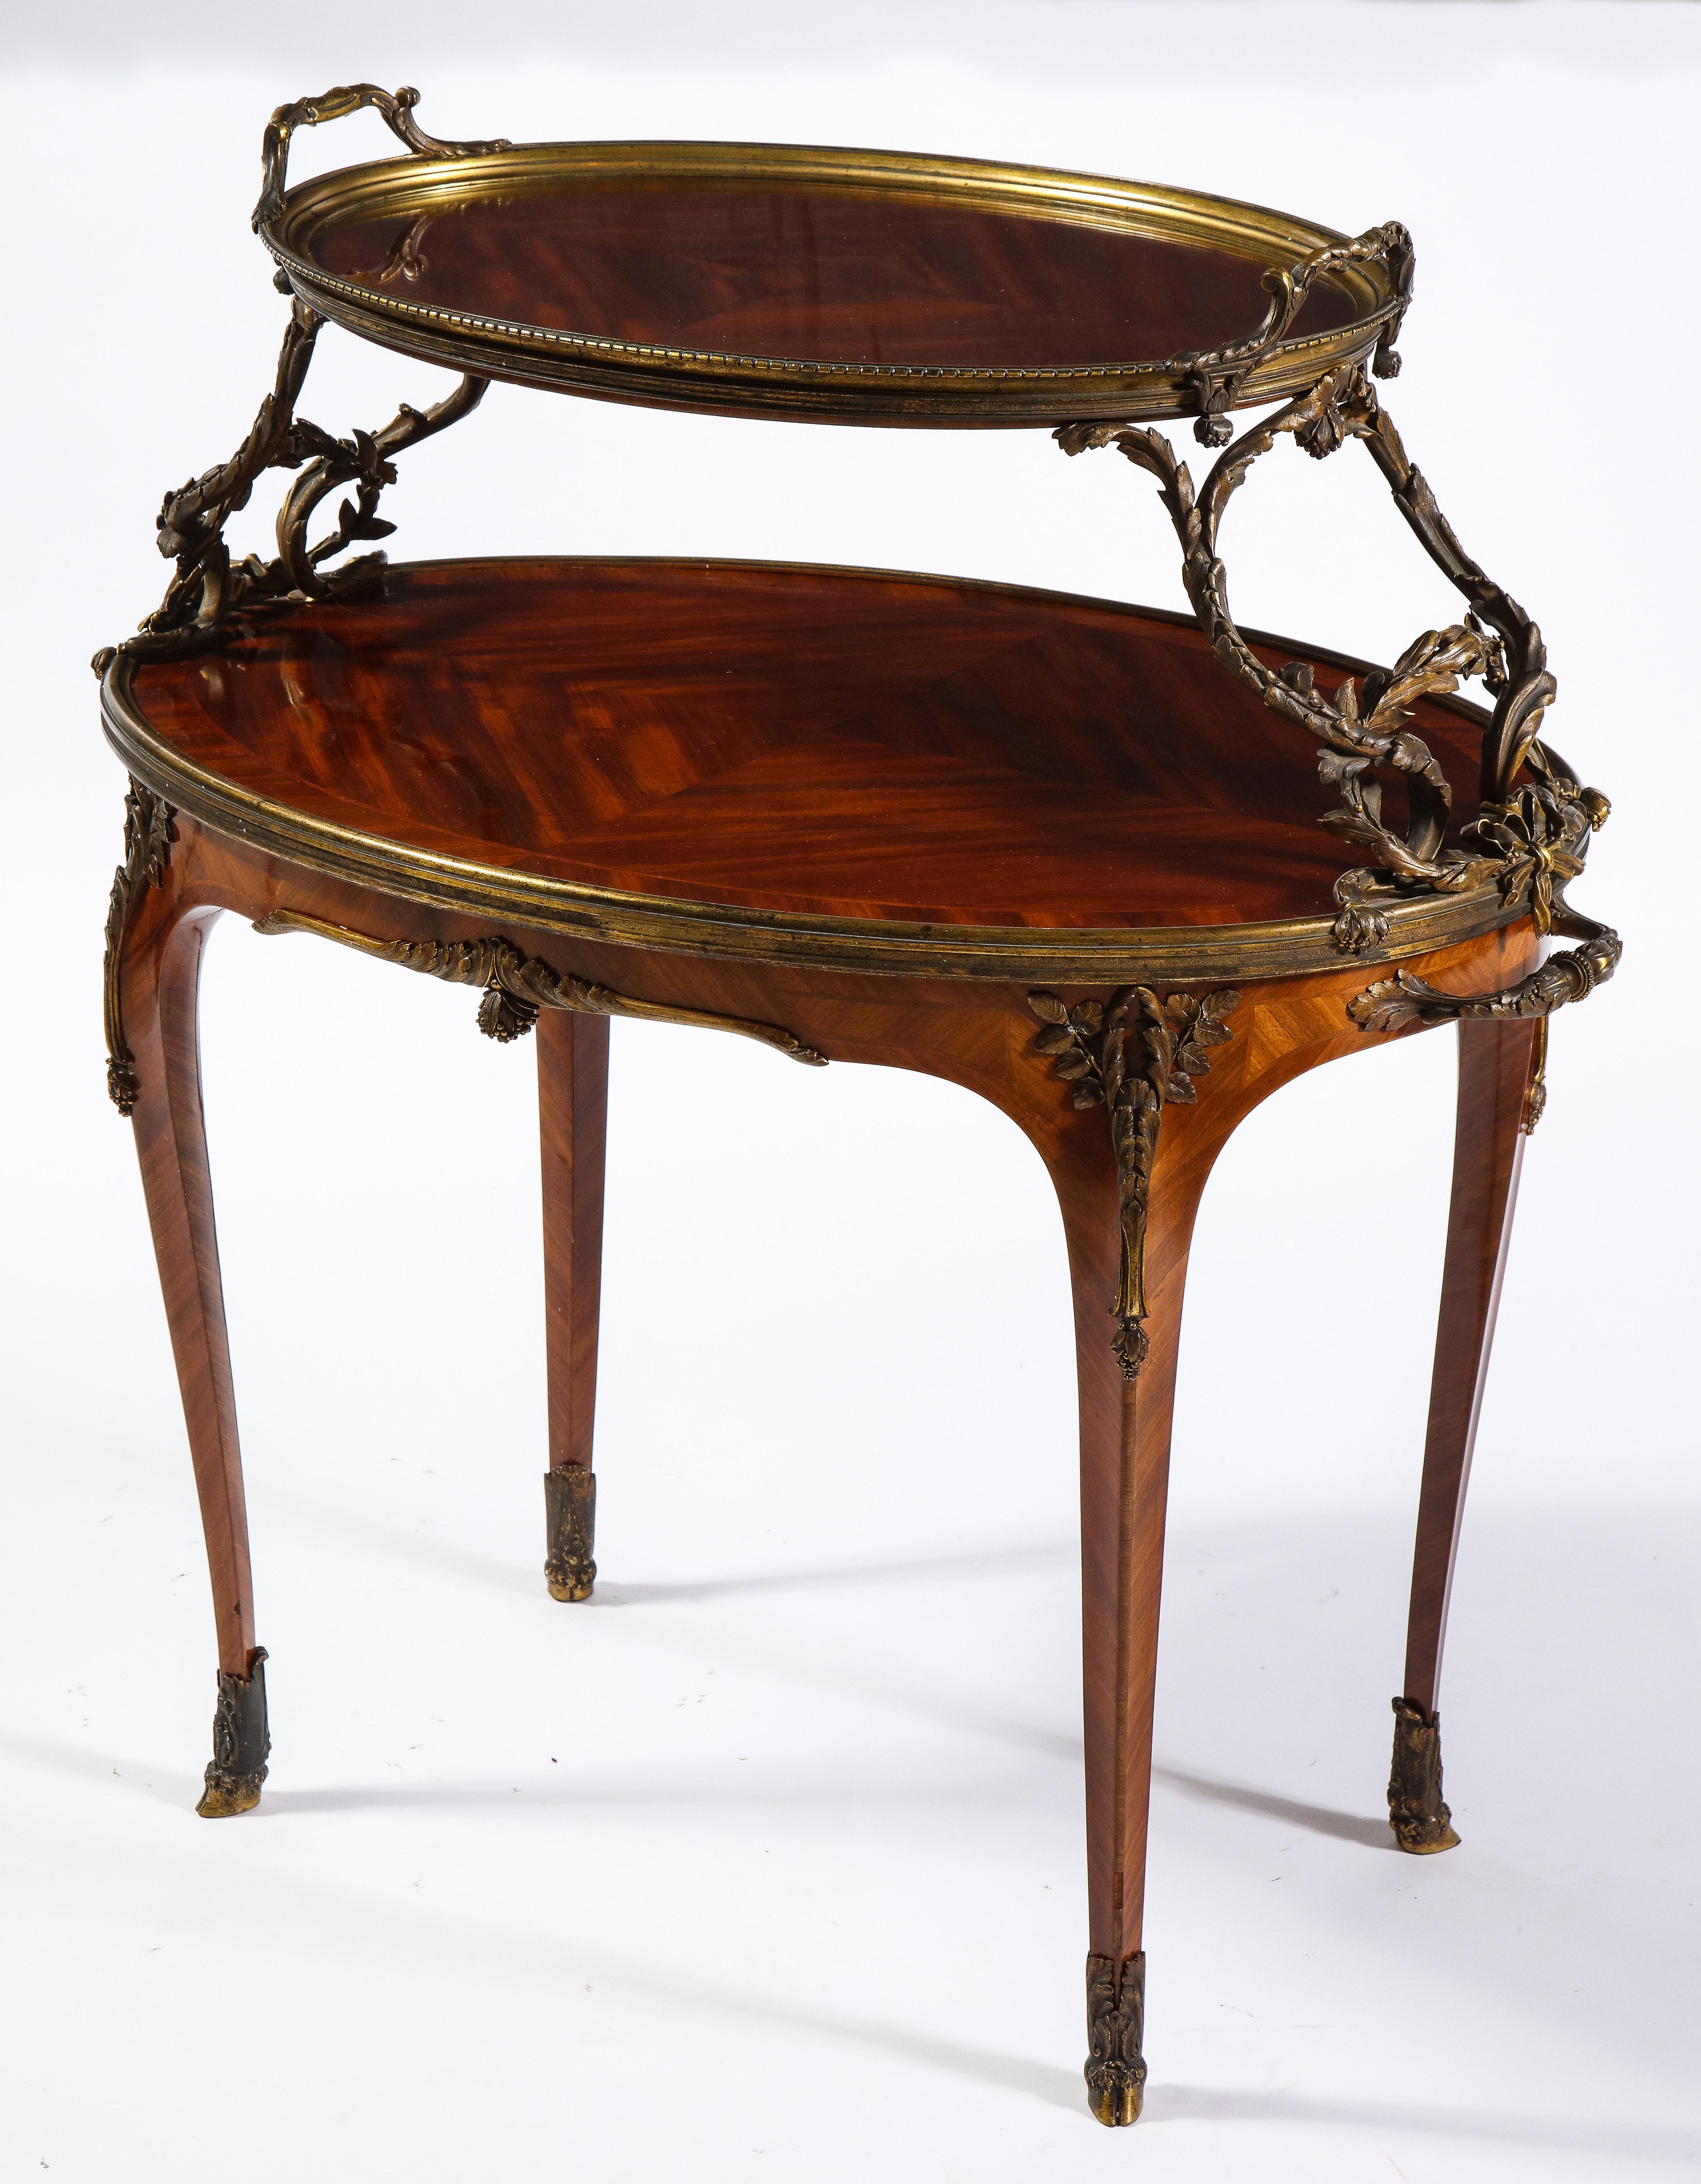 A fabulous Louis XVI style 19th century French ormolu-mounted mahogany two-tier tea table, attributed to Paul Sormani. The ovoid upper tier with original removable glass tray supported by scrolling foliage, on slight cabriole legs.
Dimensions:
37